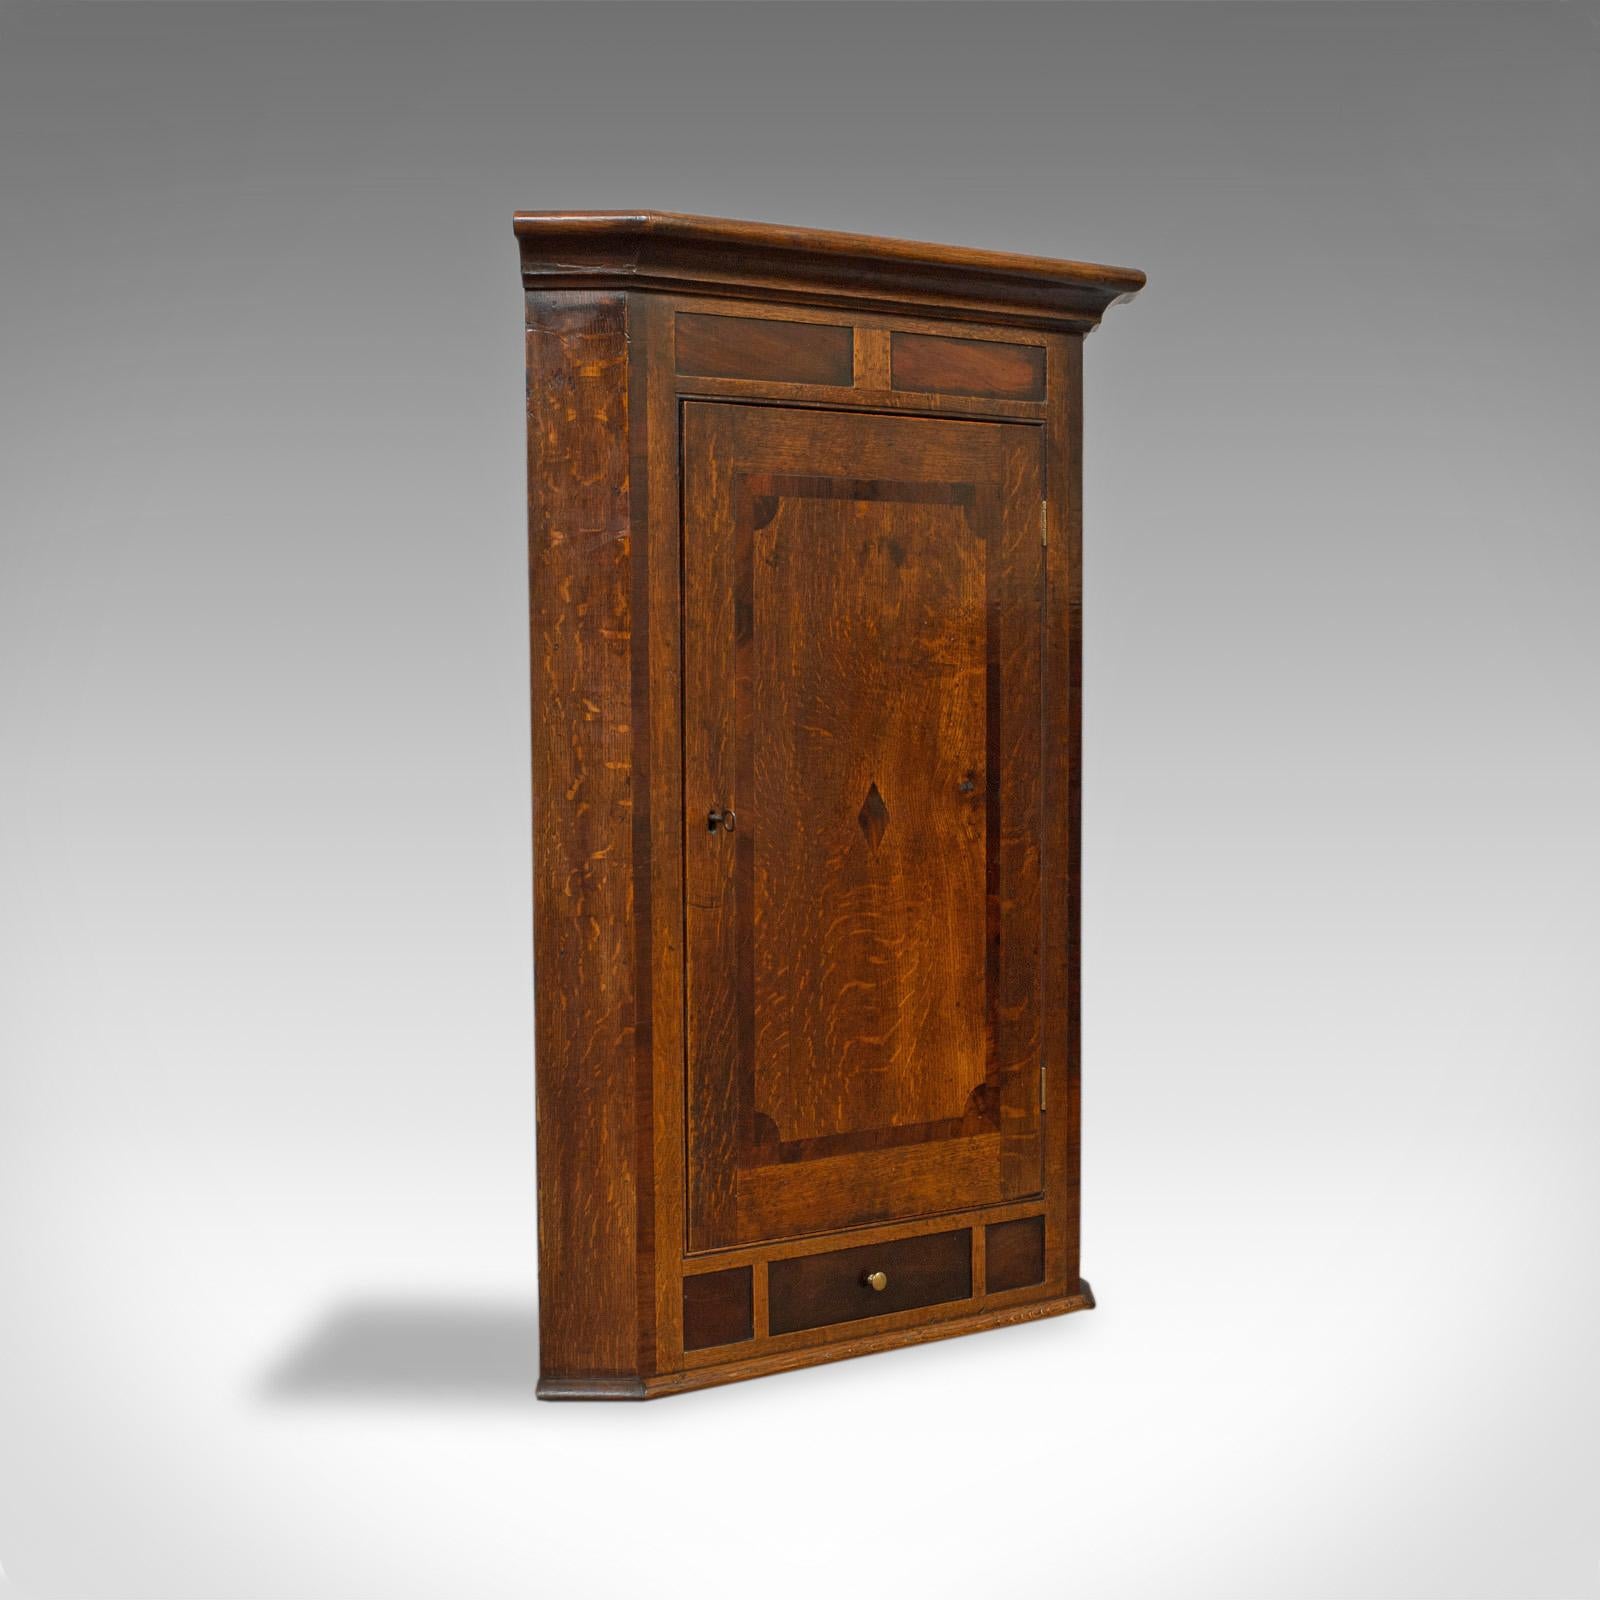 This is an antique corner cabinet. An English, Georgian, oak, hanging wall cupboard dating to the late 18th century, circa 1780.

Select cuts of oak display fine grain interest and wisps of medullary rays
Highlighted with panels of well figured,